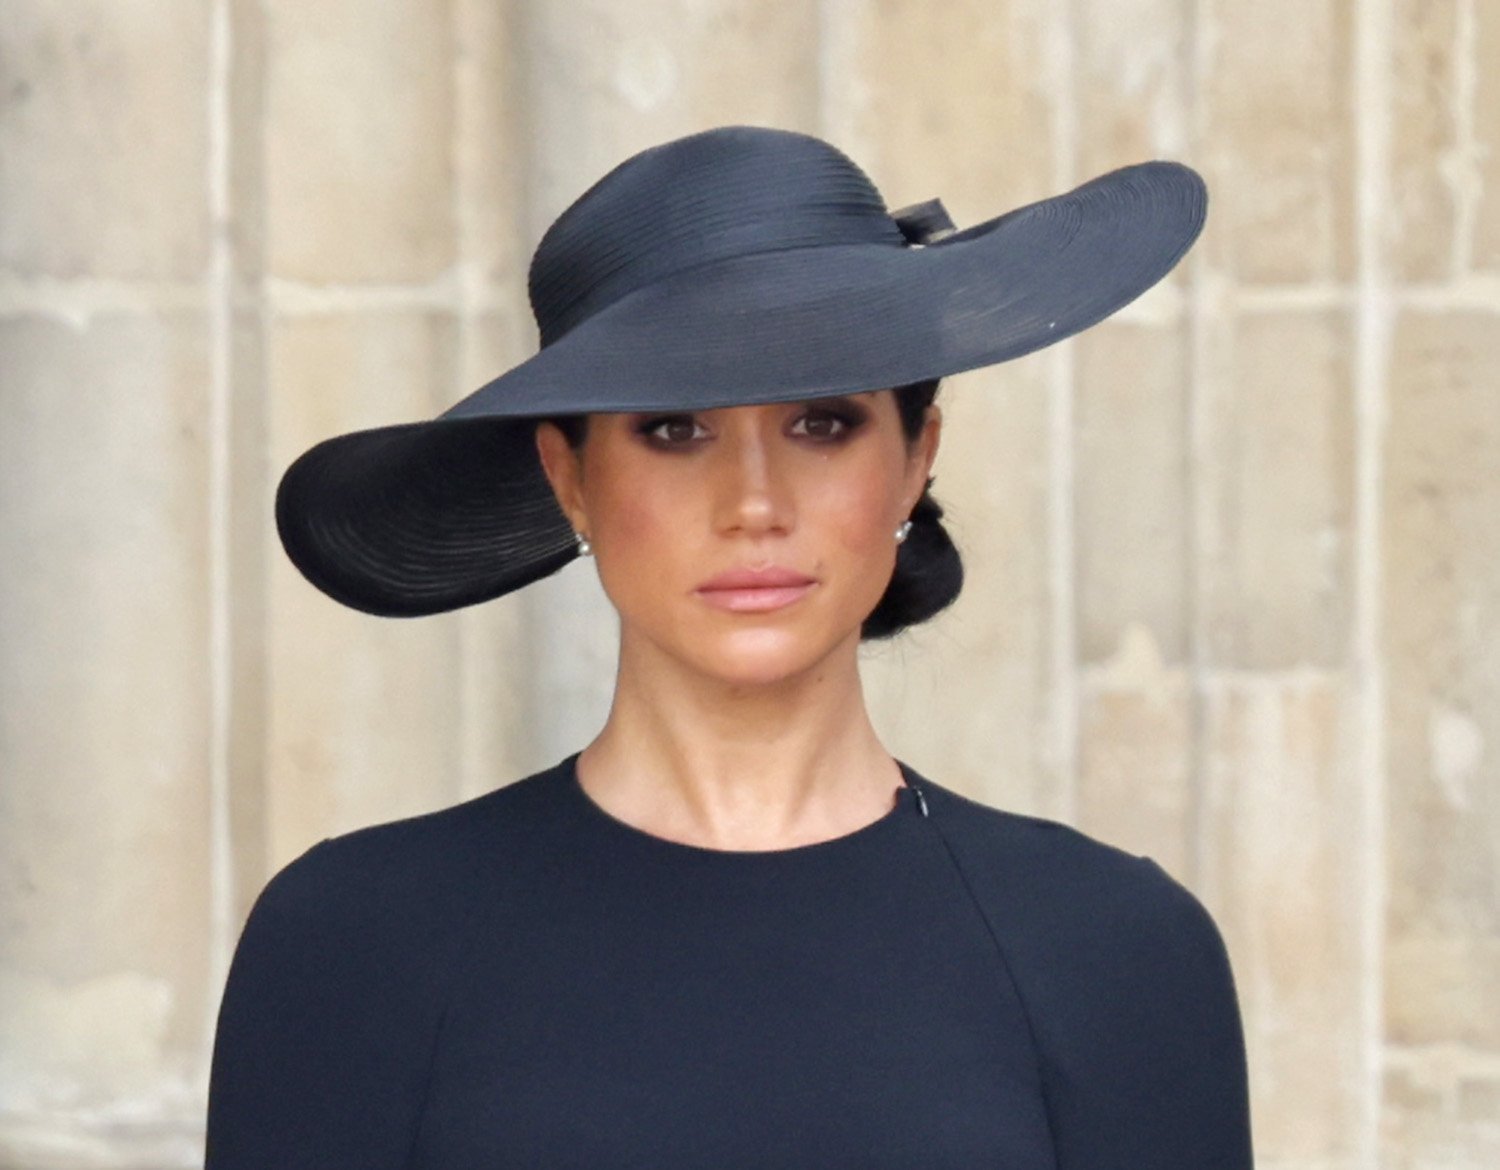 Meghan Markle's body language was understated at queen elizabeth's funeral 